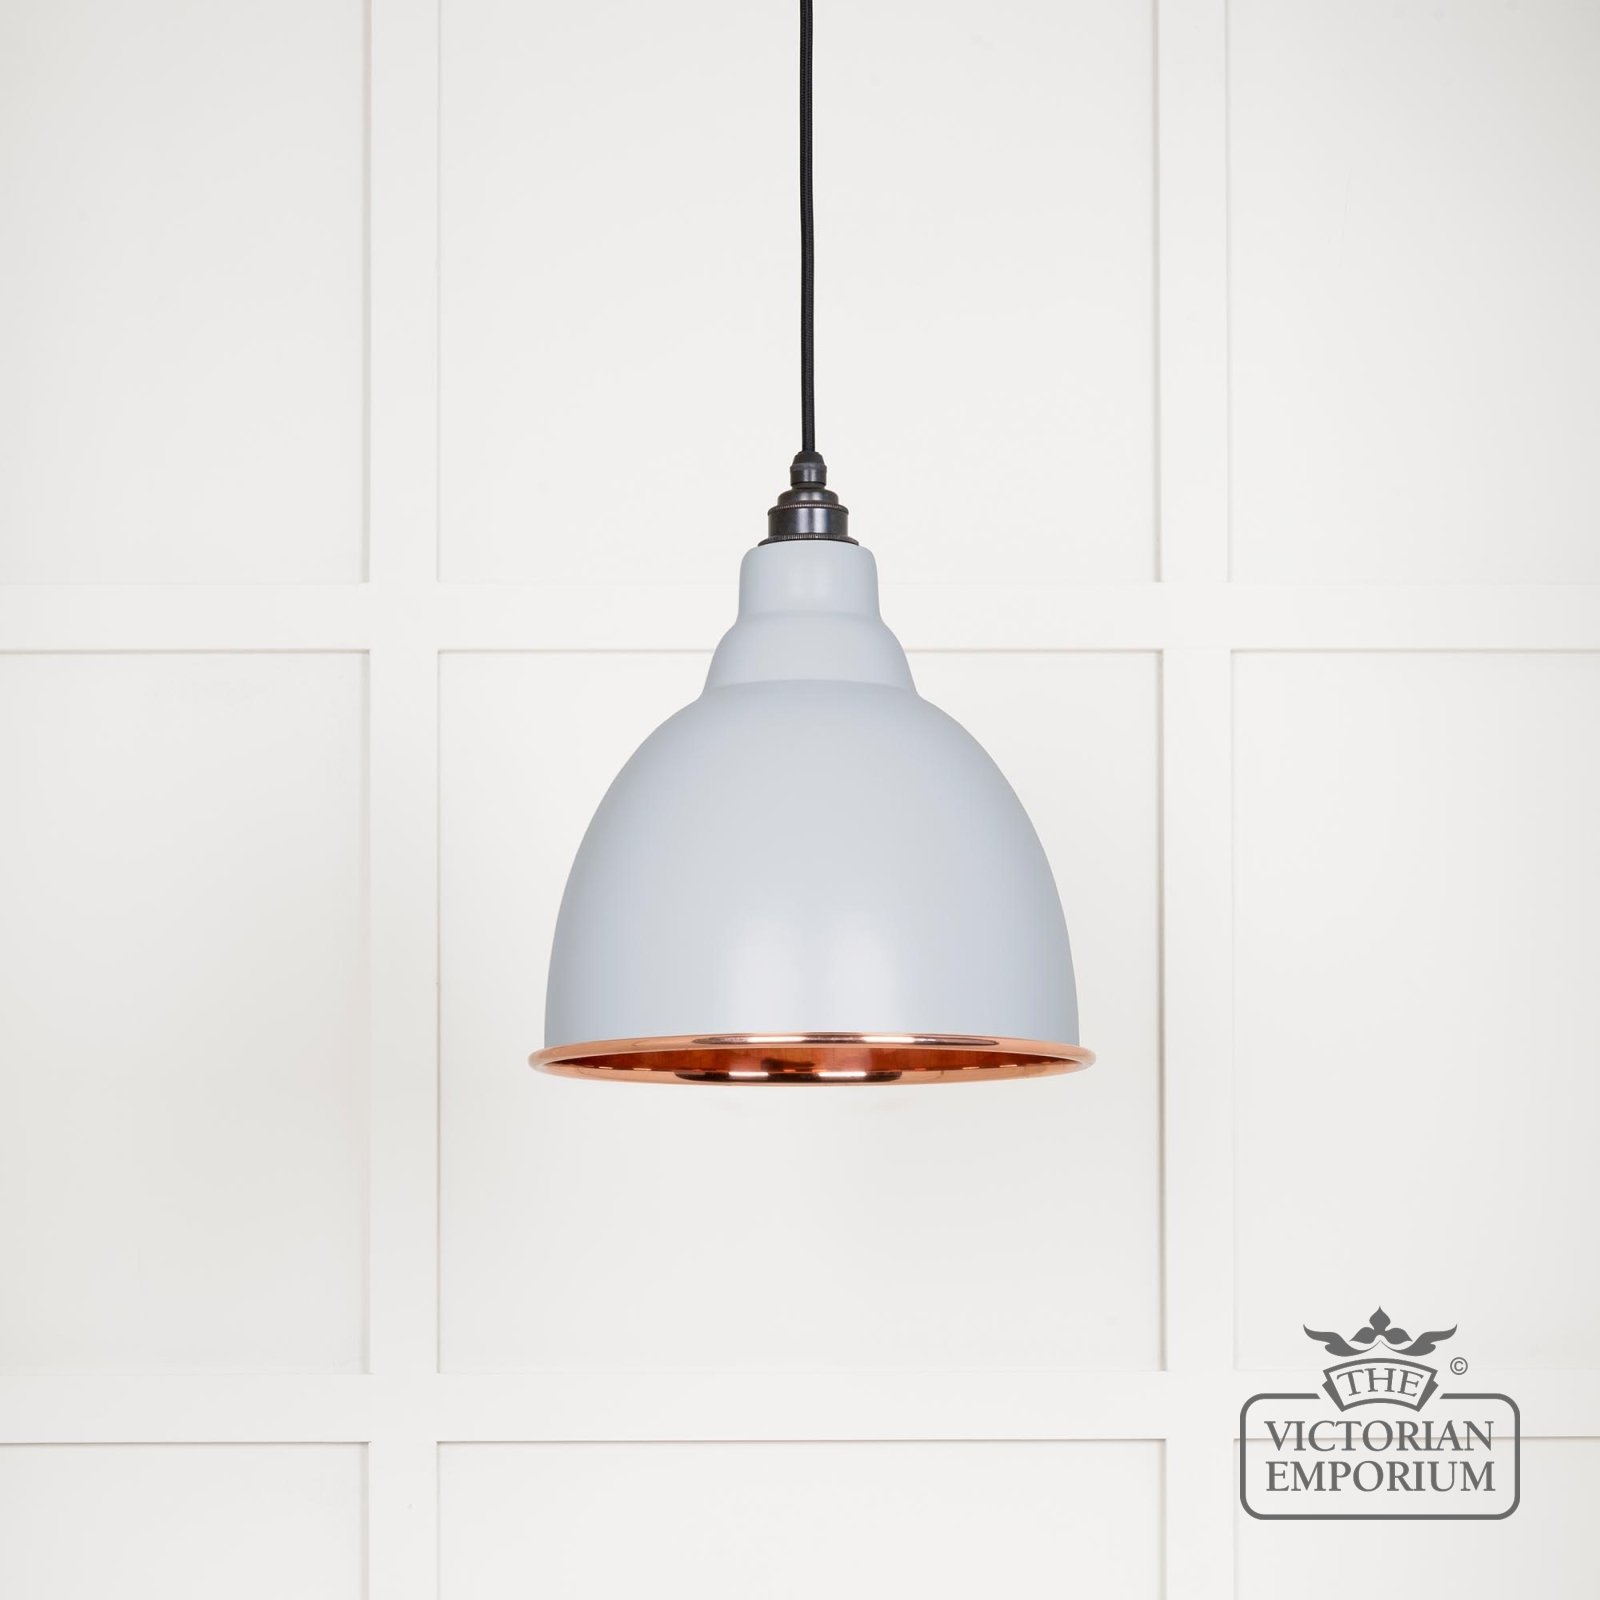 Brindle Pendant Light in Smooth Copper with Birch Exterior